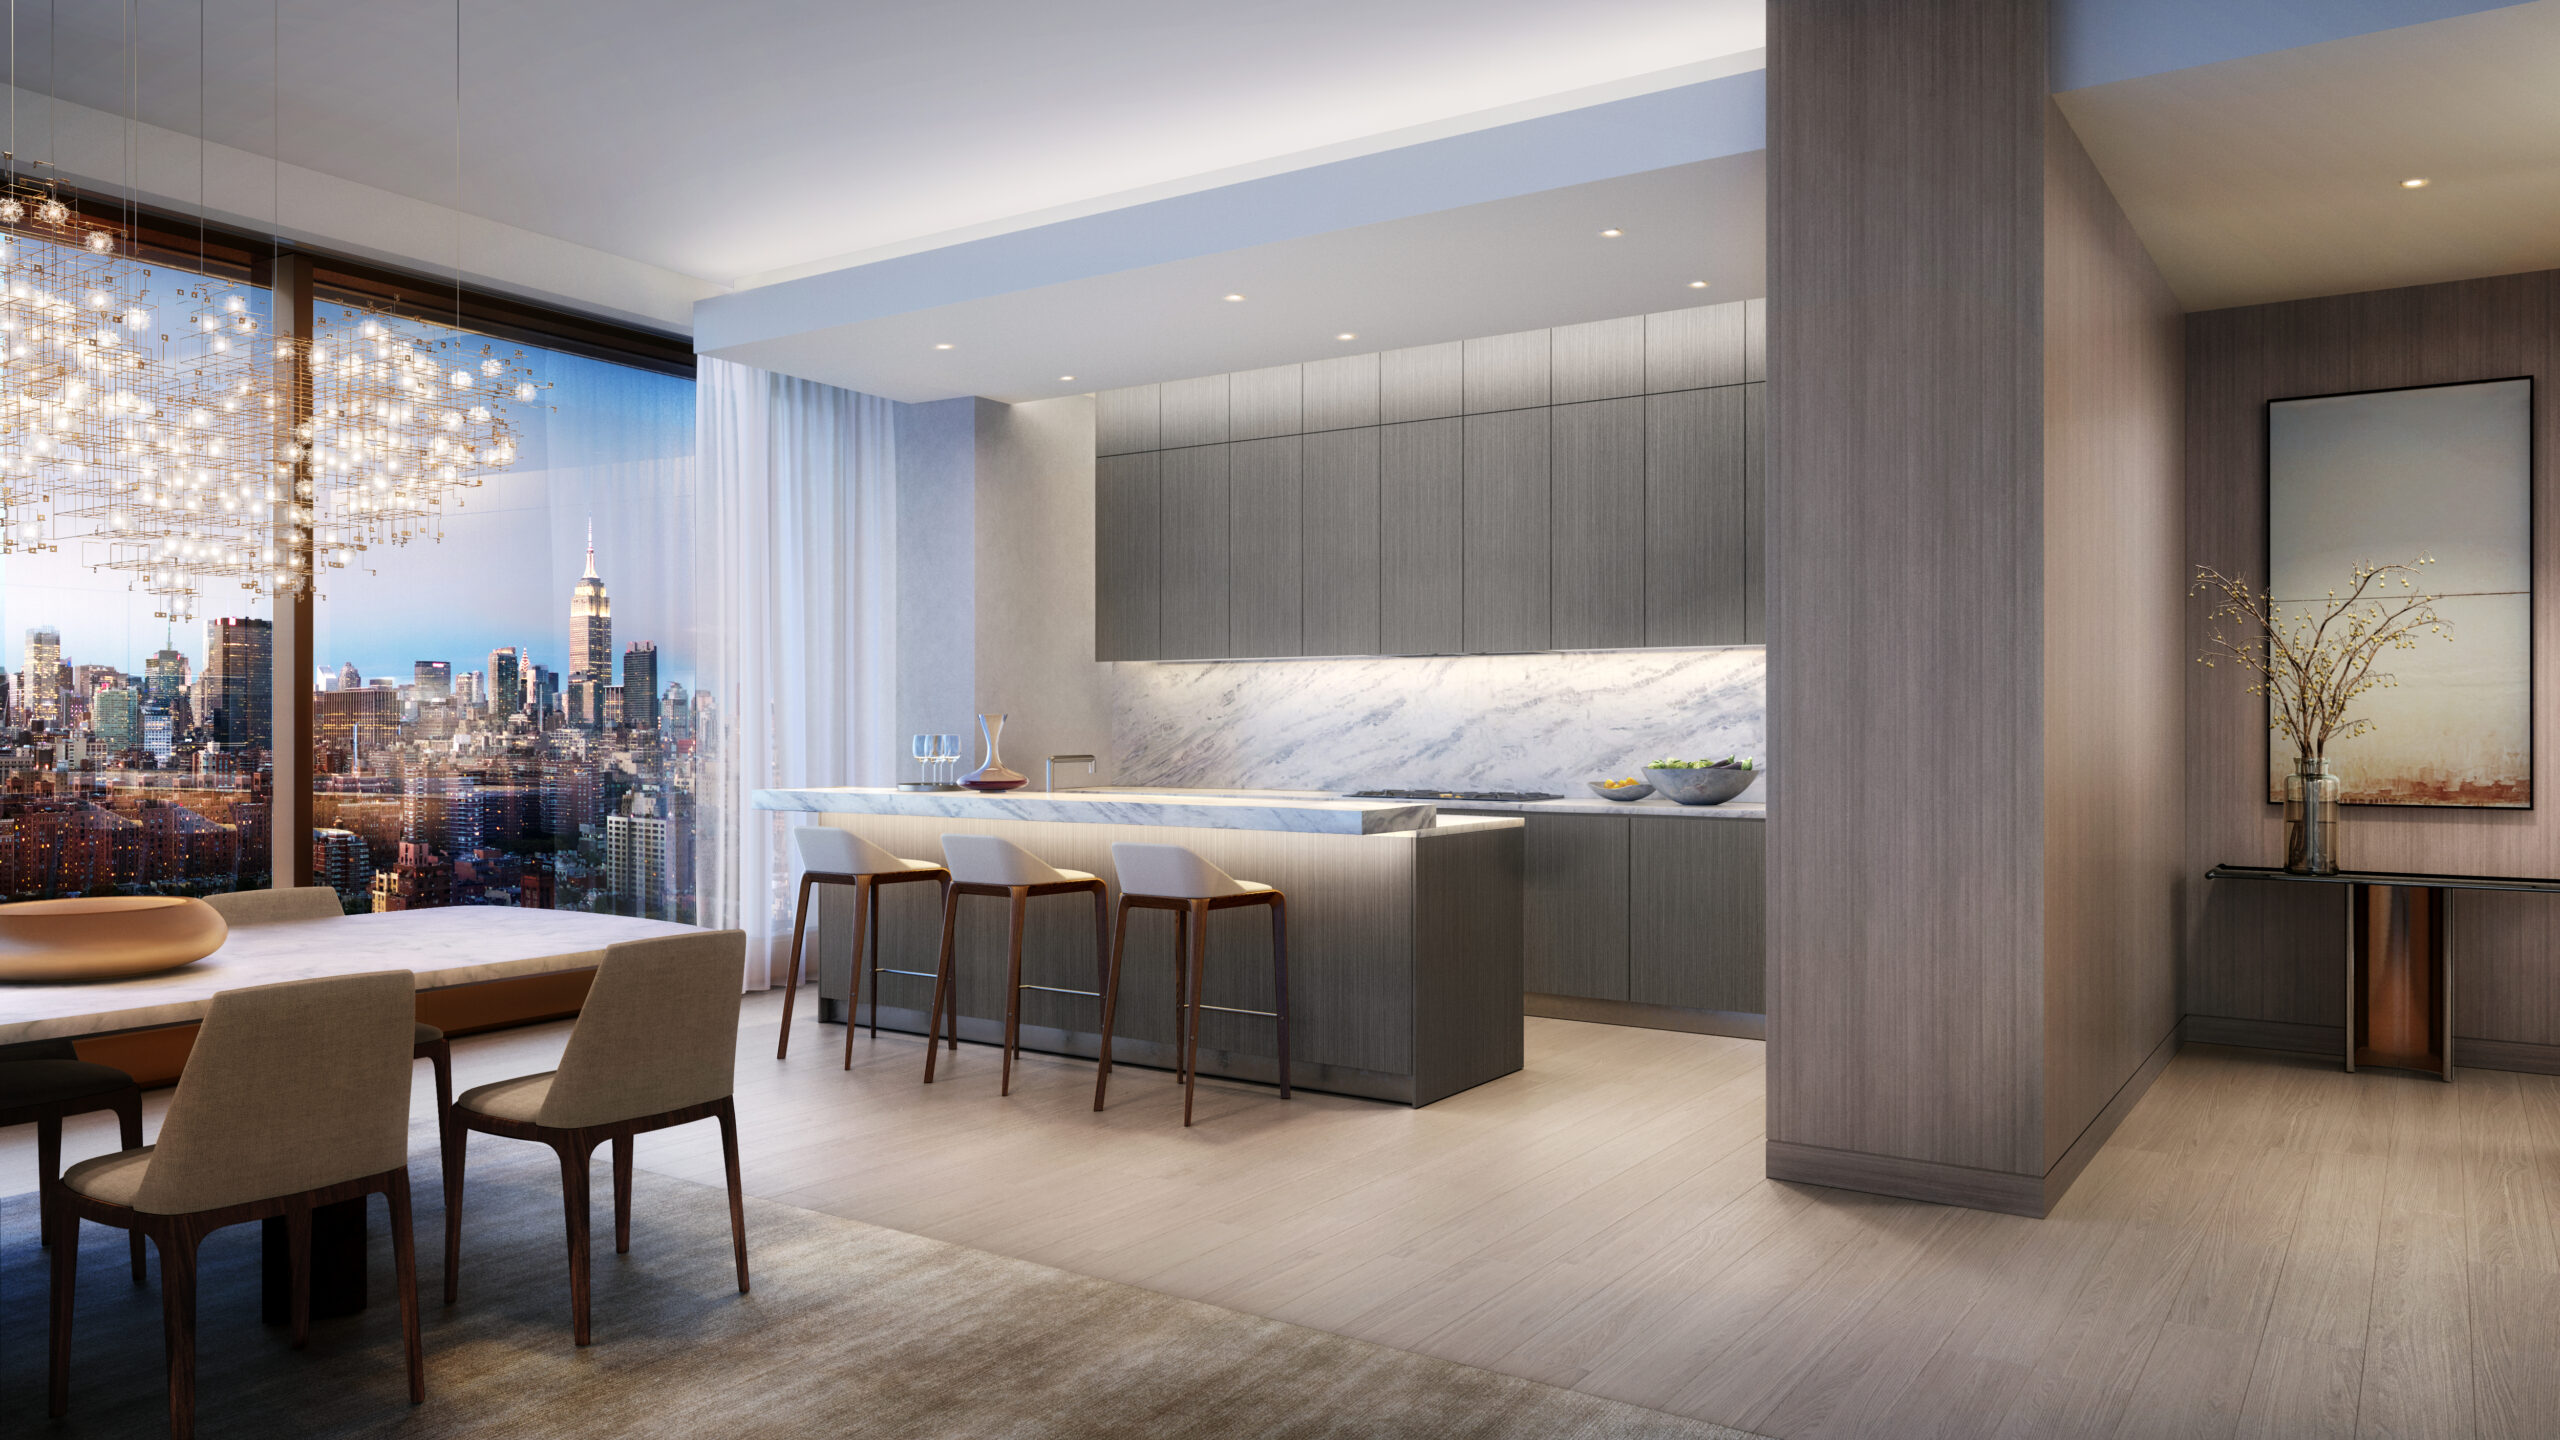 luxury kitchen interiors with city view